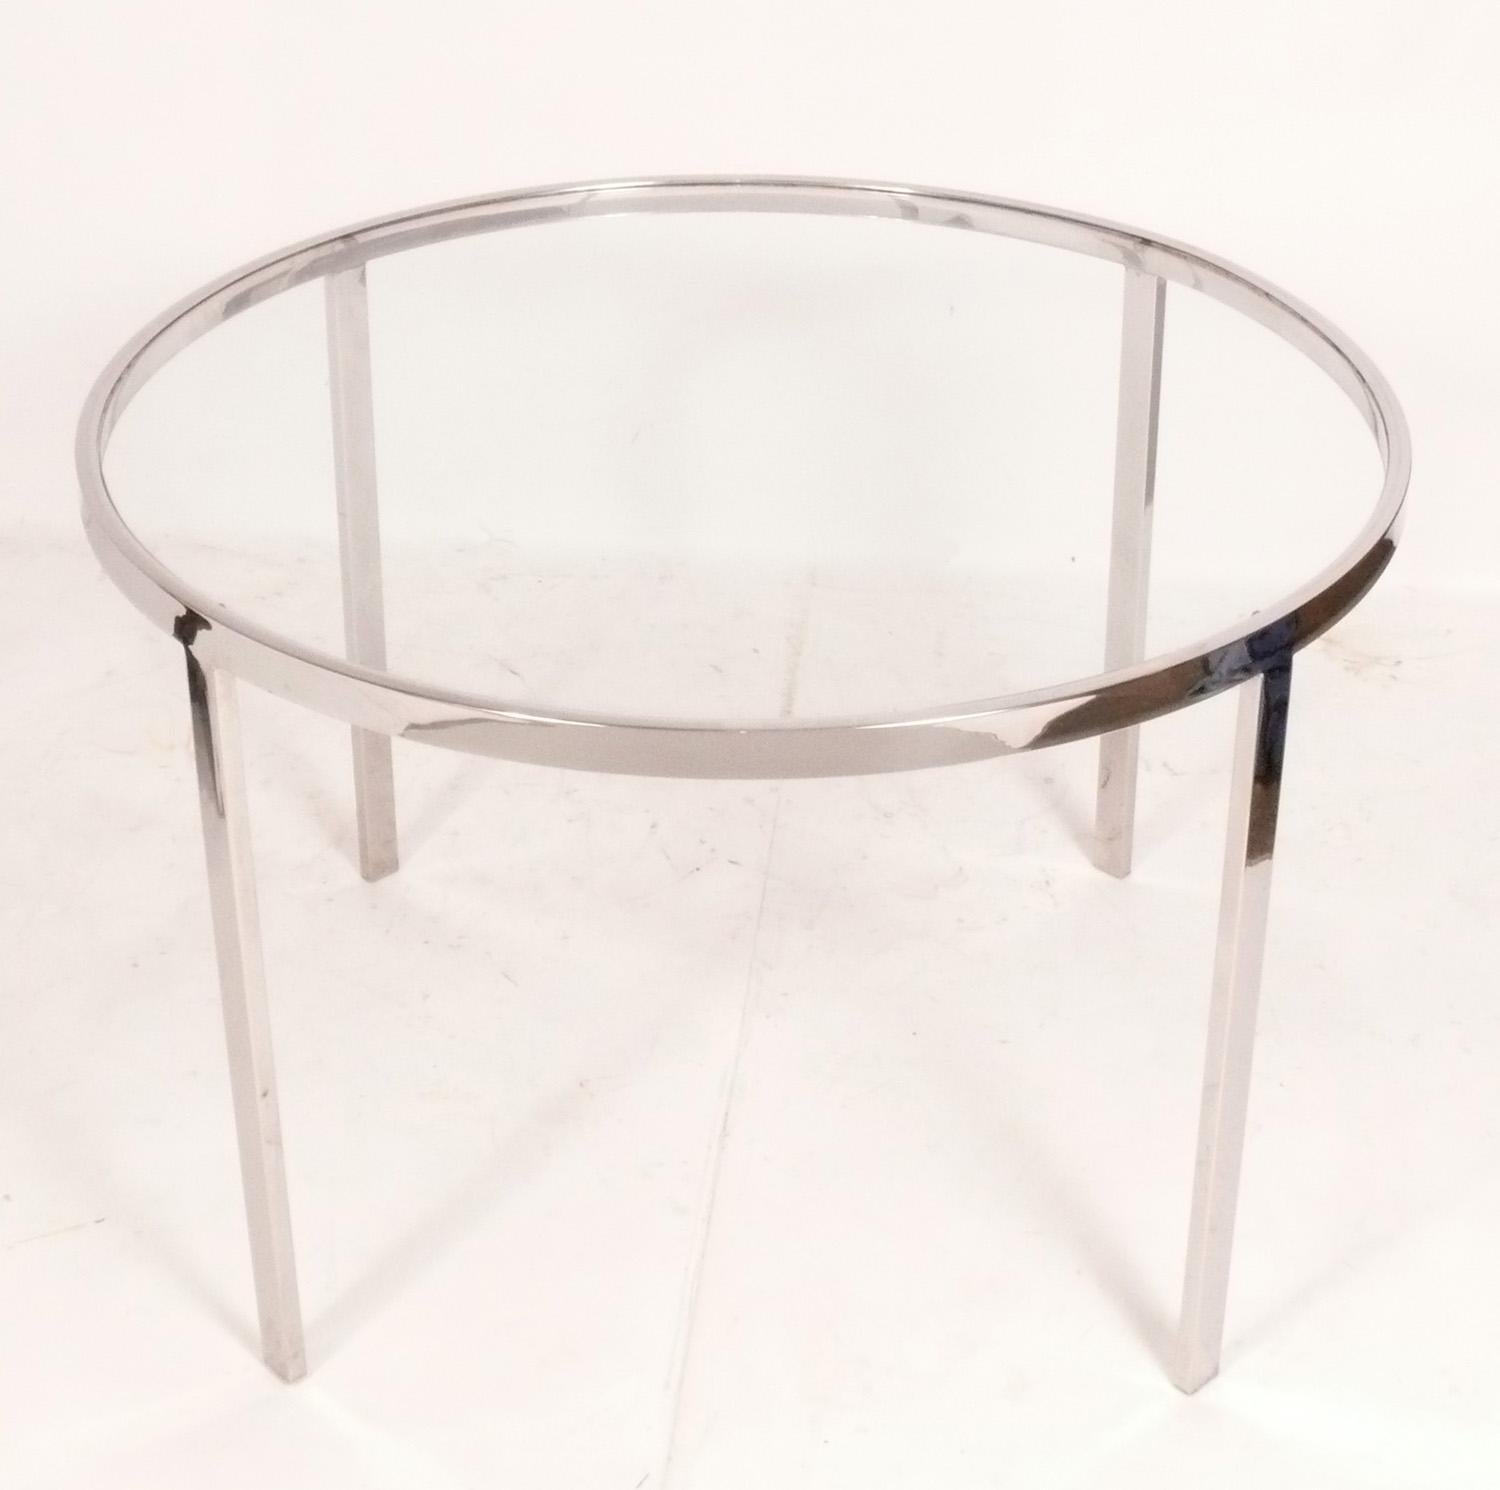 Mid-Century Modern Clean Lined Chrome Dining Table by Milo Baughman for DIA 42